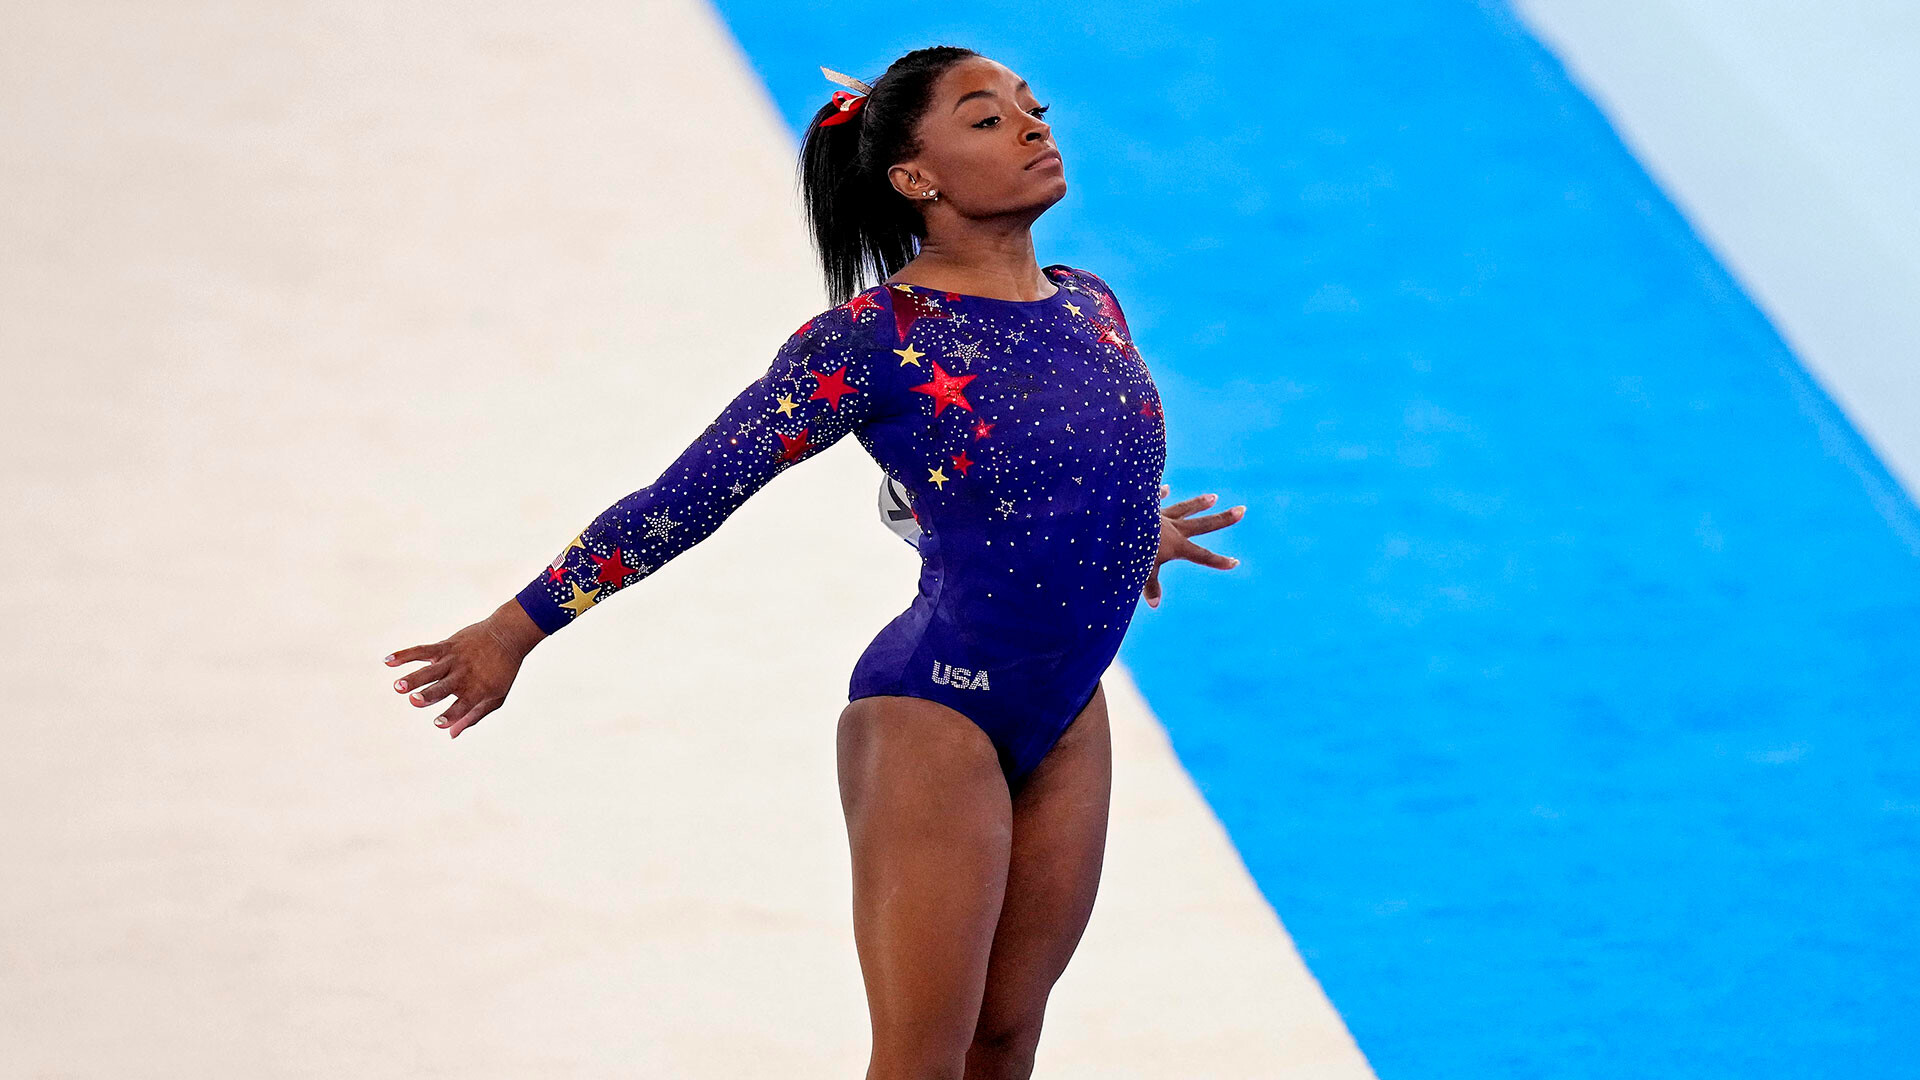 Simone Biles: She placed first in the all-around at the 2019 U.S. National Gymnastics Championships. 1920x1080 Full HD Background.